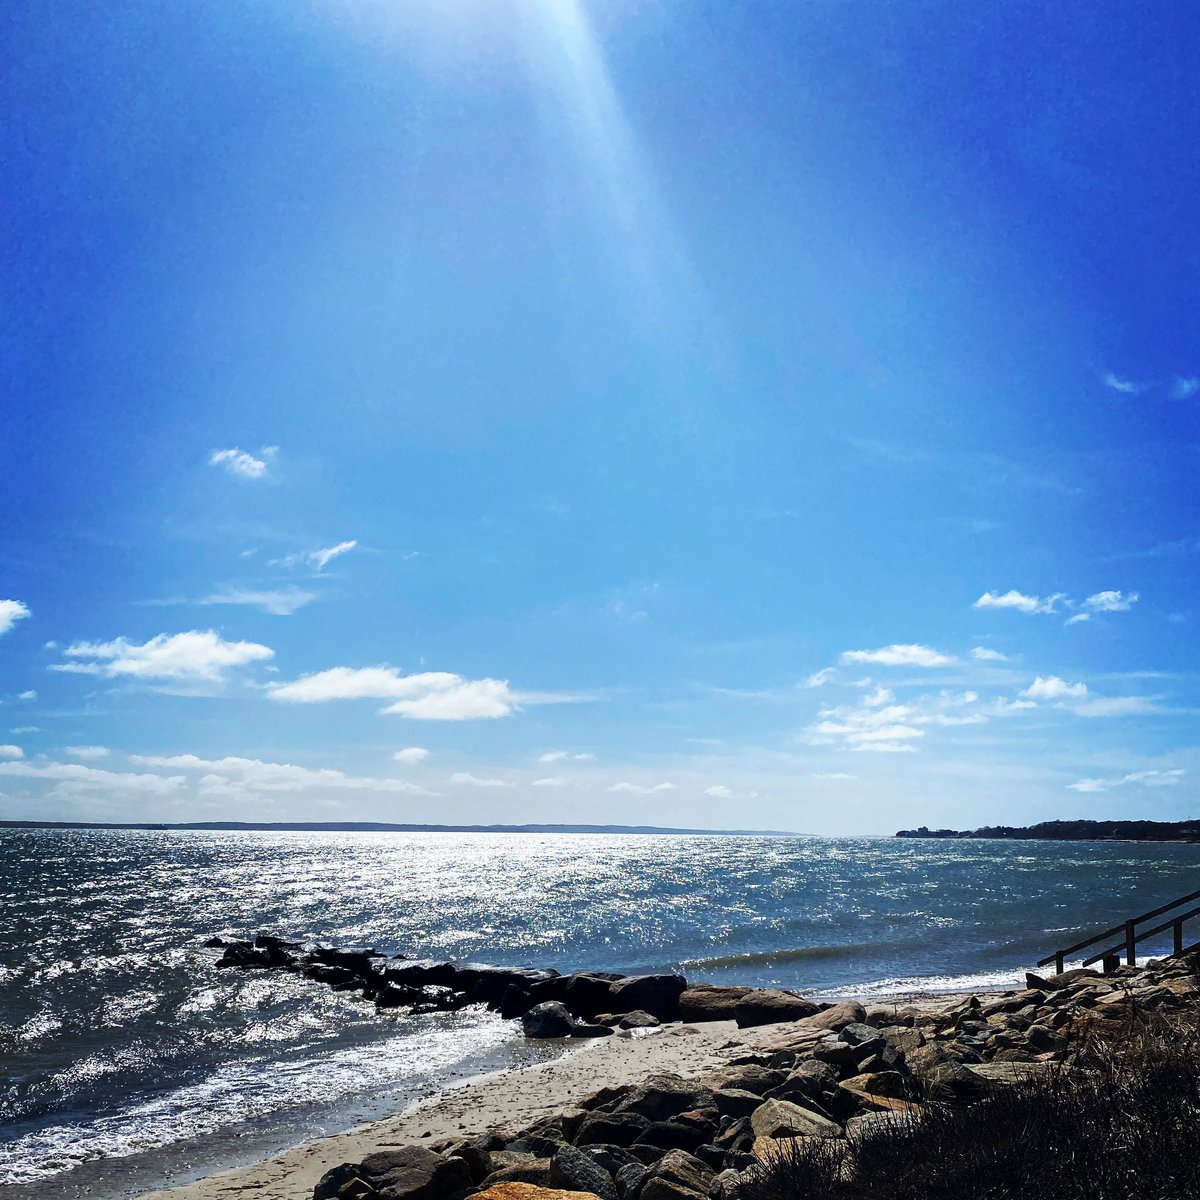 After a few days of gloom, the ocean had that glittery shimmery vibe I love so much - it only gets that way on blustery cool sunny days. I took it as a sign to ditch the screen and take a nice long walk. #vineyardsound #ocean #wind #seashimmer #capecod #falmouth #tgif